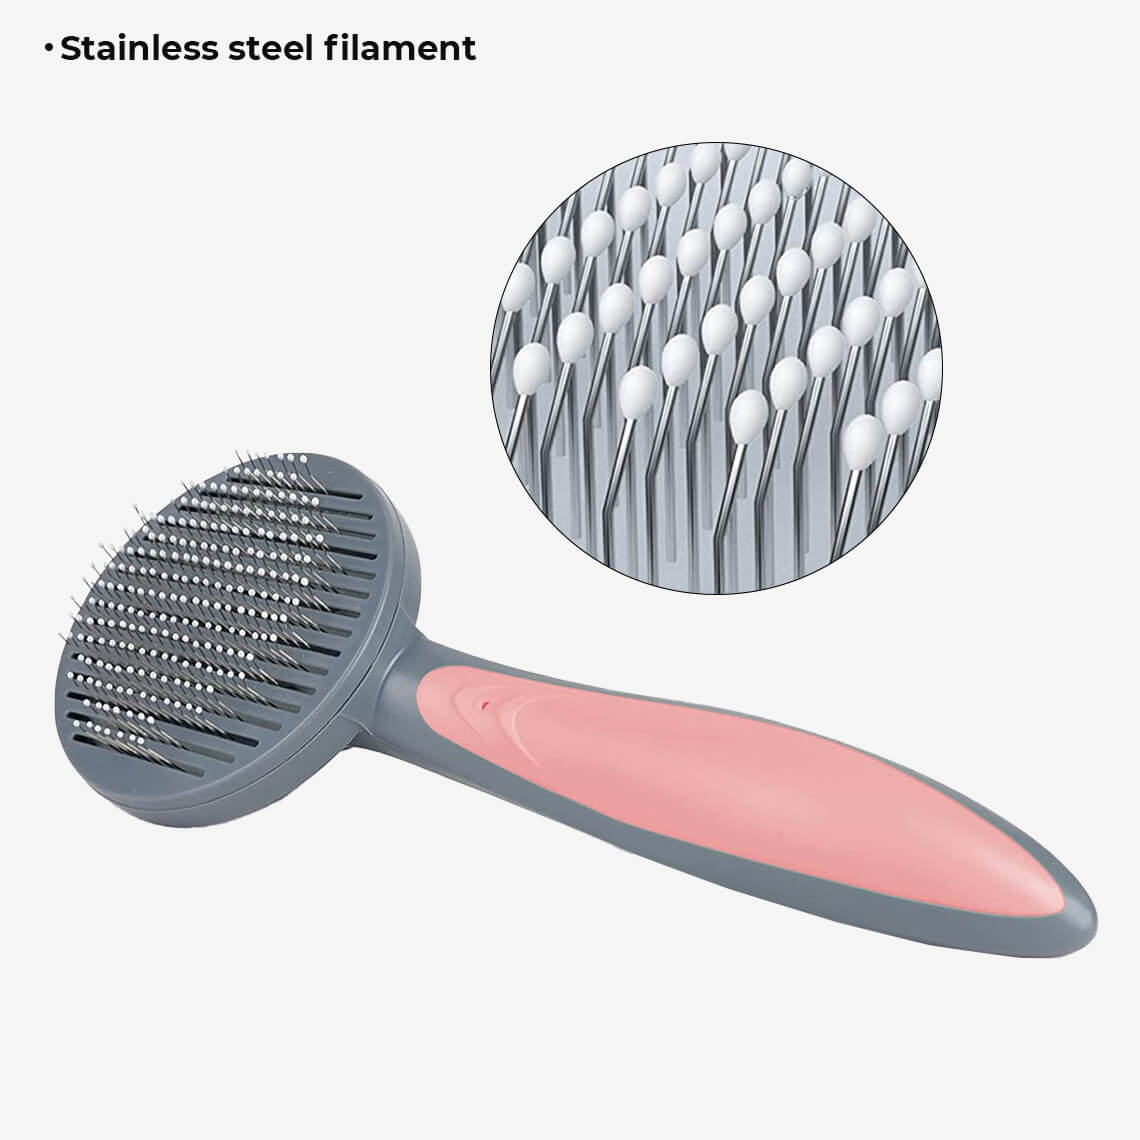 A pink pet comb and its close up of the stainless steel filament.